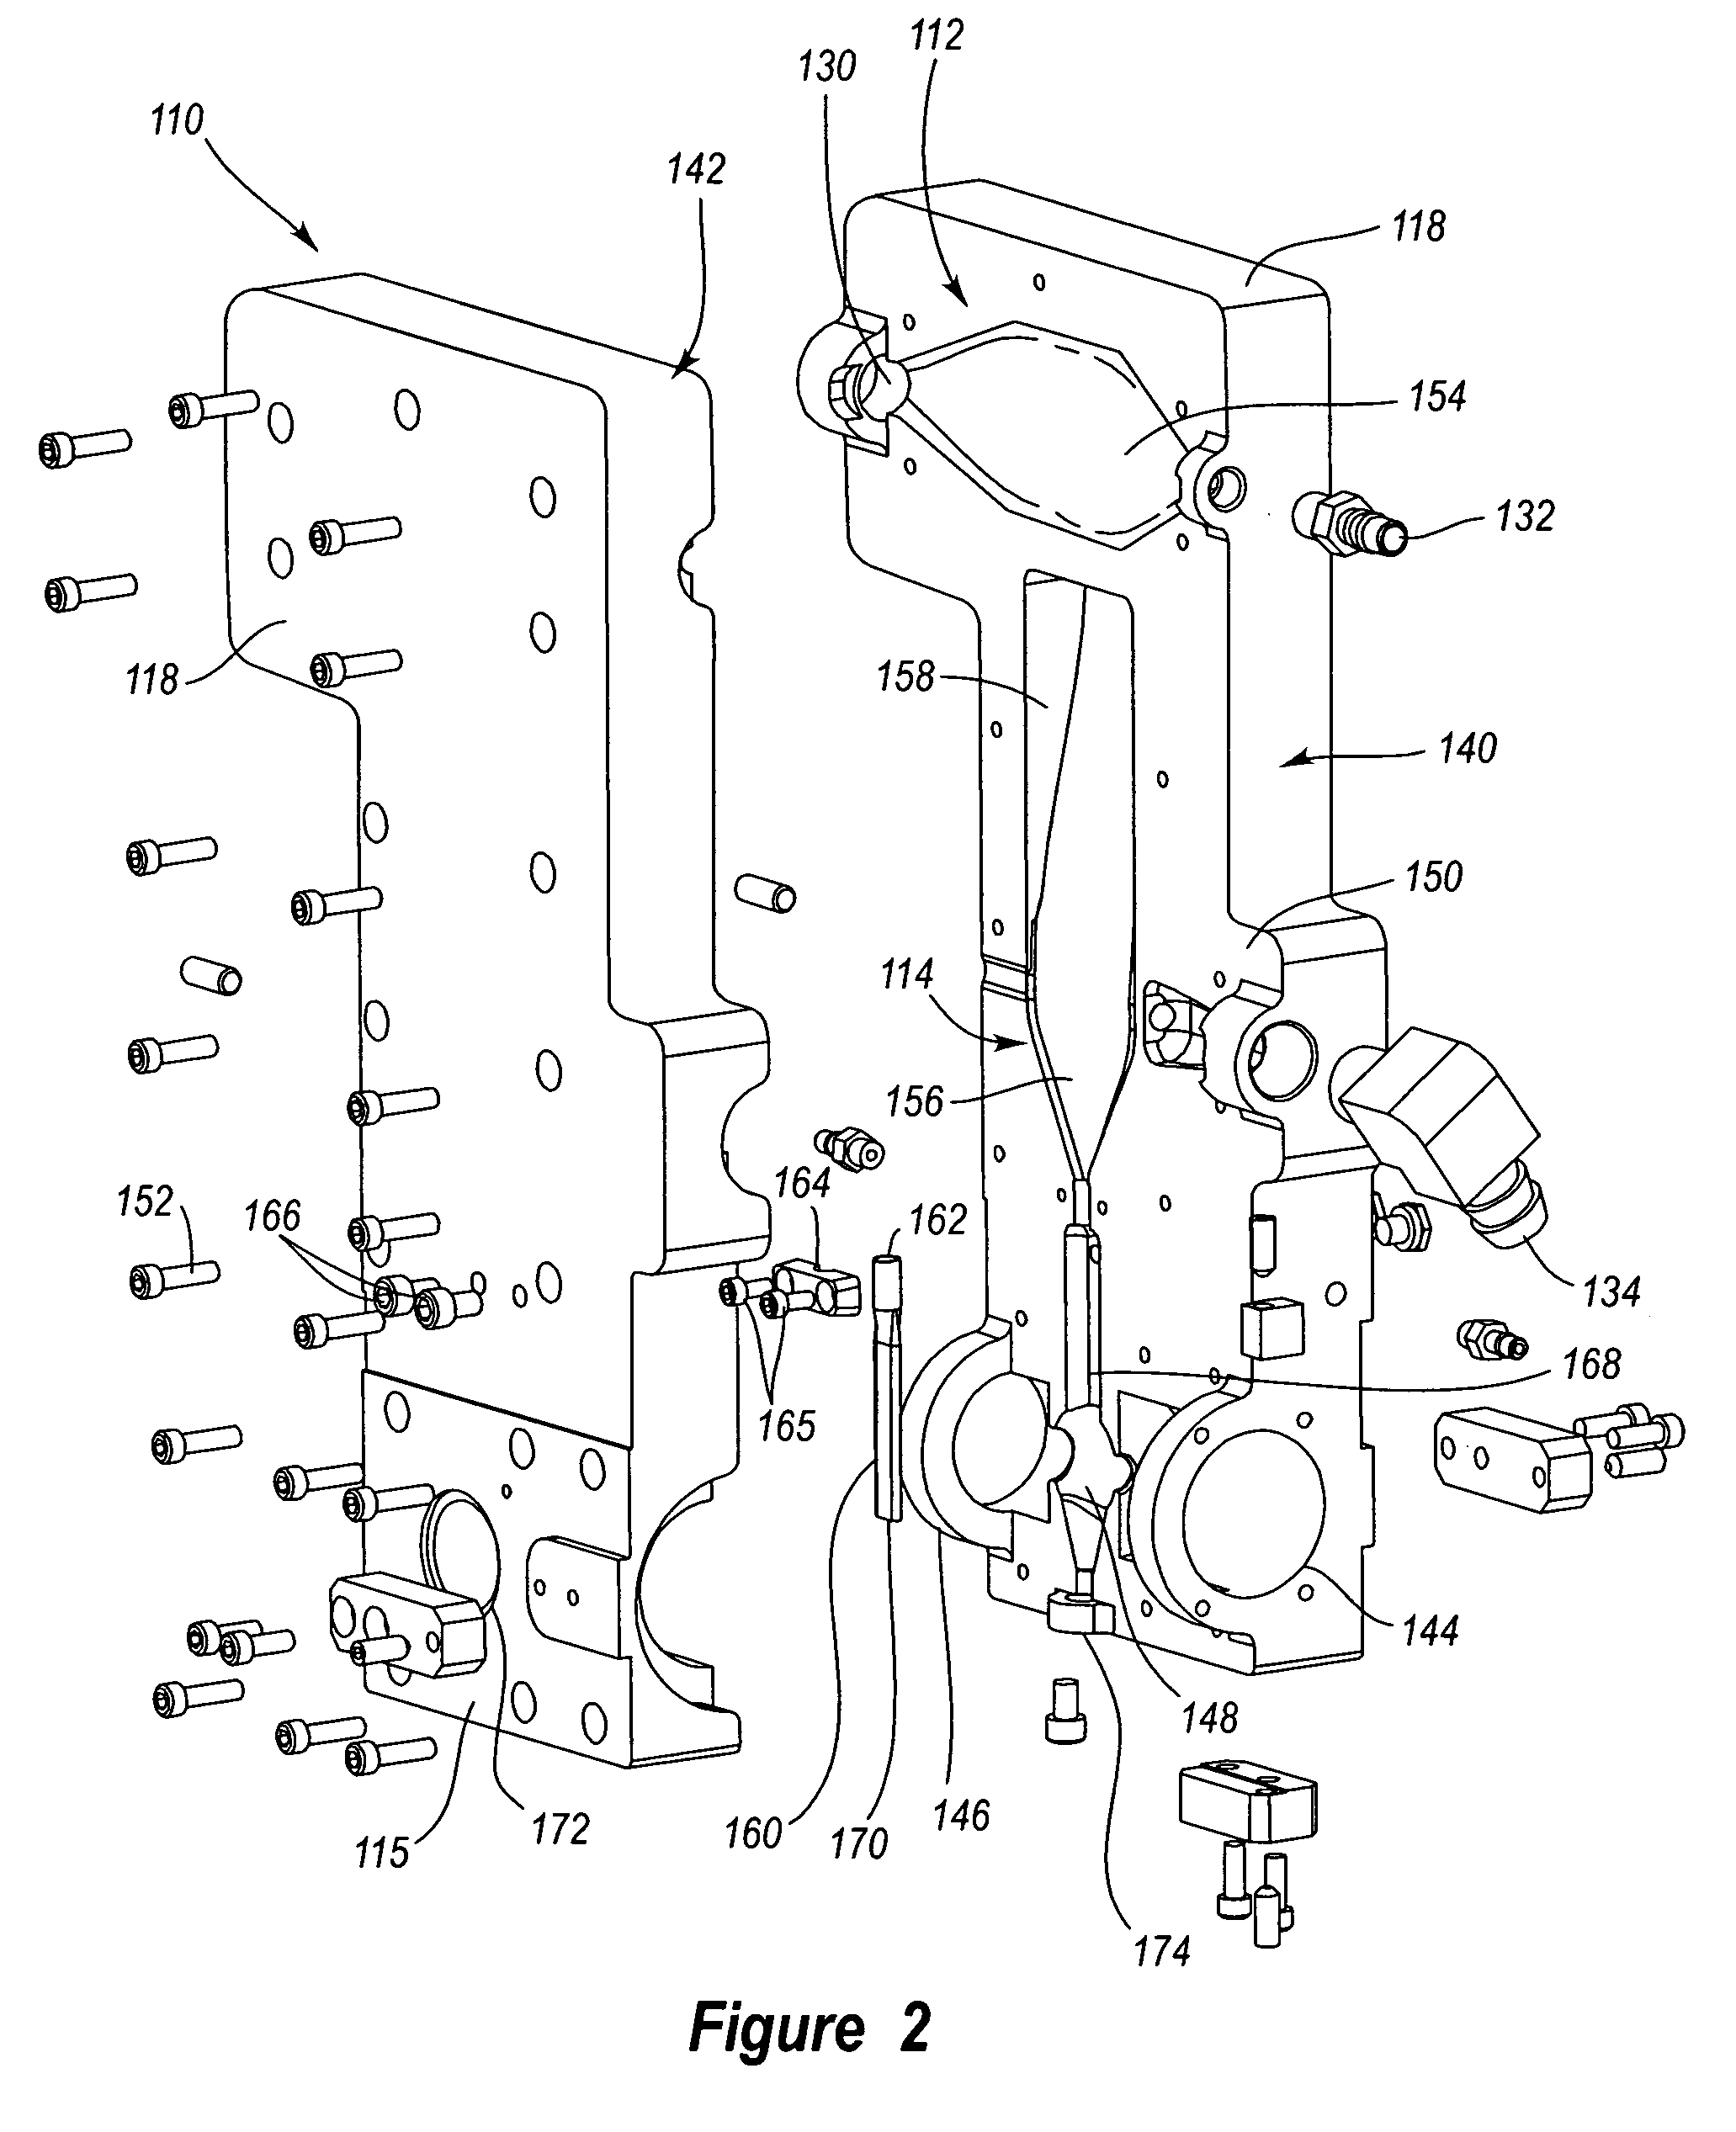 Integrated assembly for delivery of air stream for optical analysis